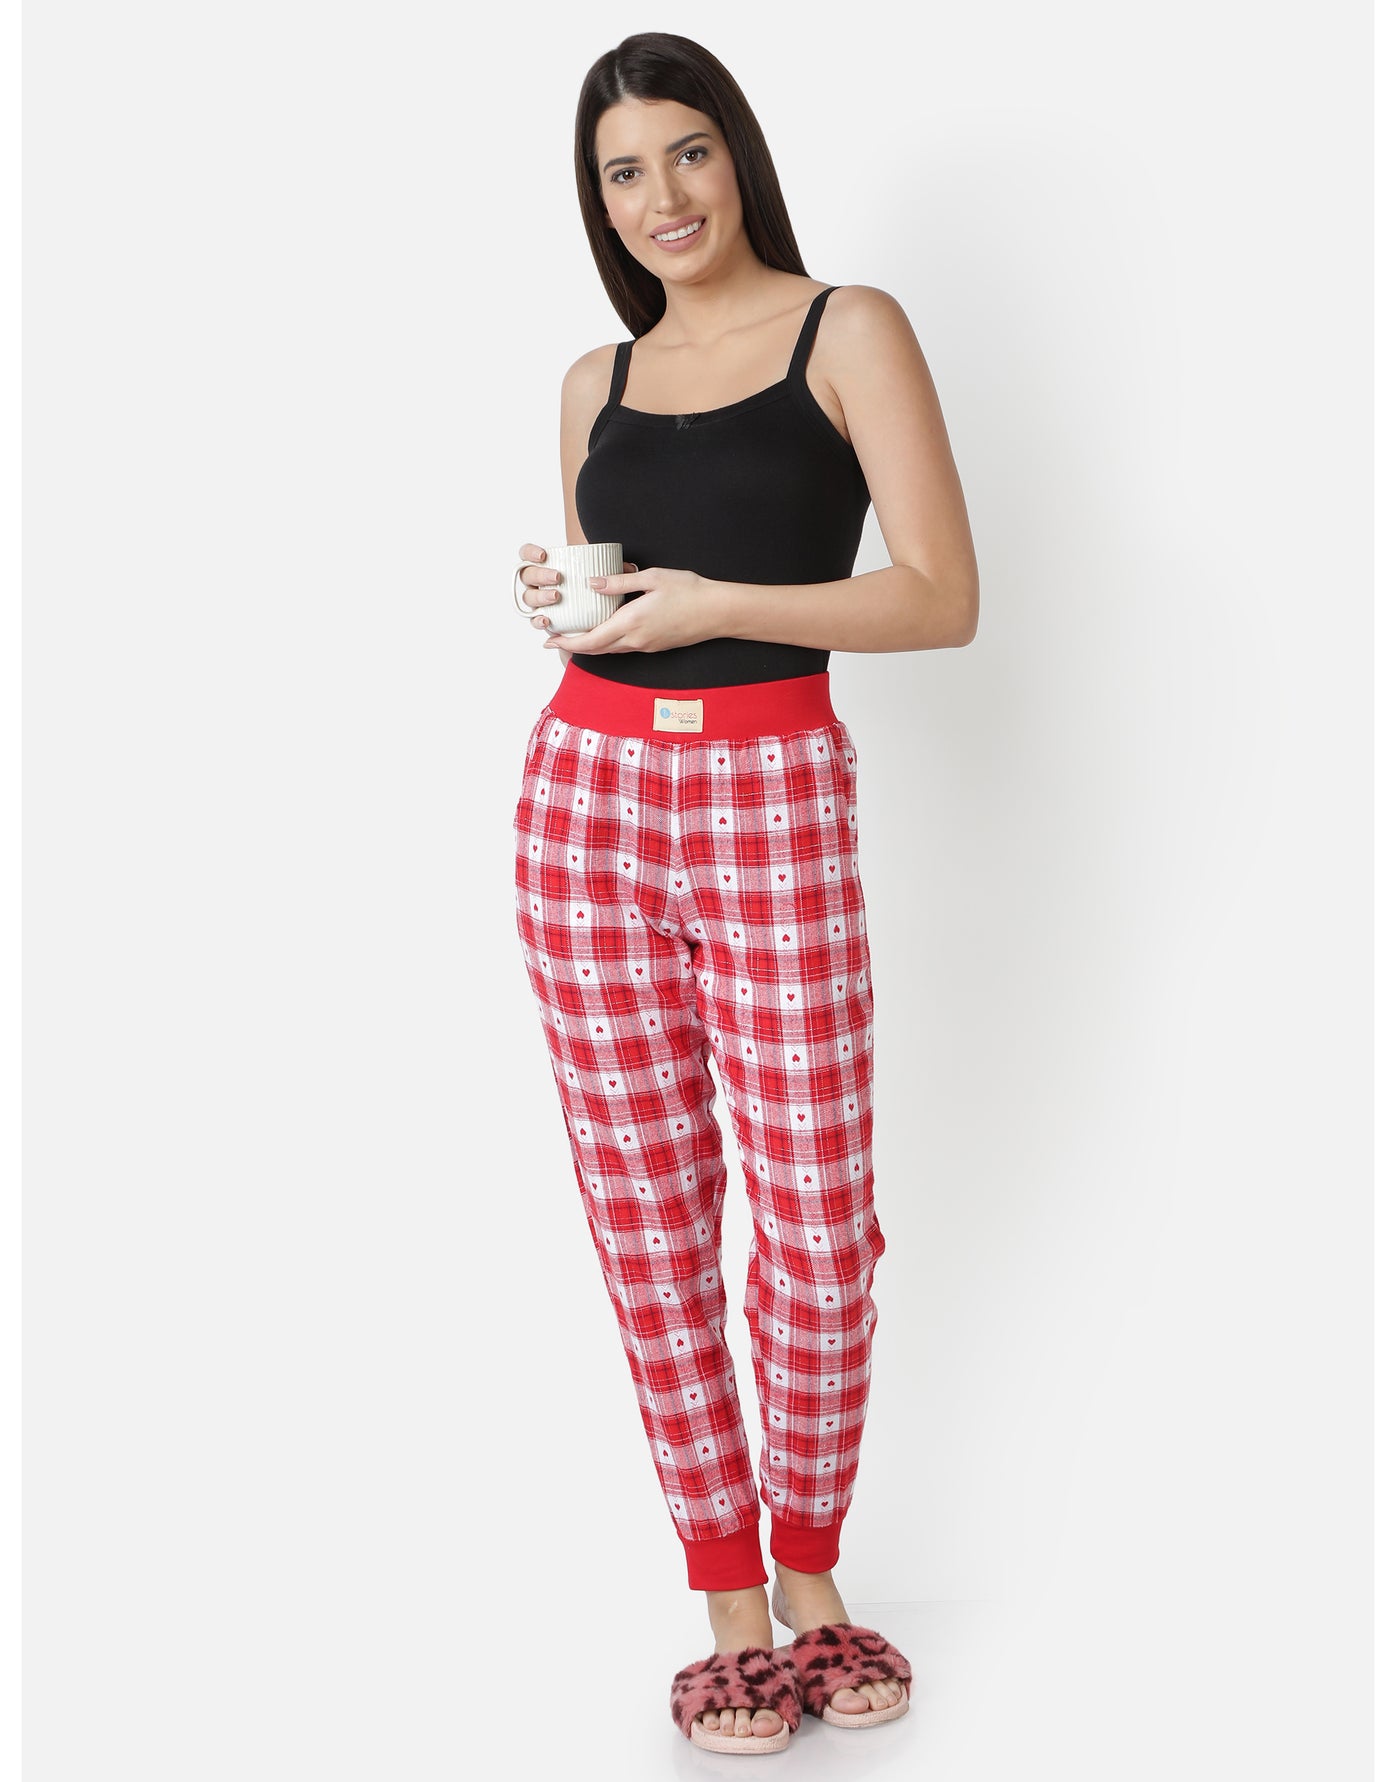 Lounge Pant for Women-Red Heart Checked Jogger